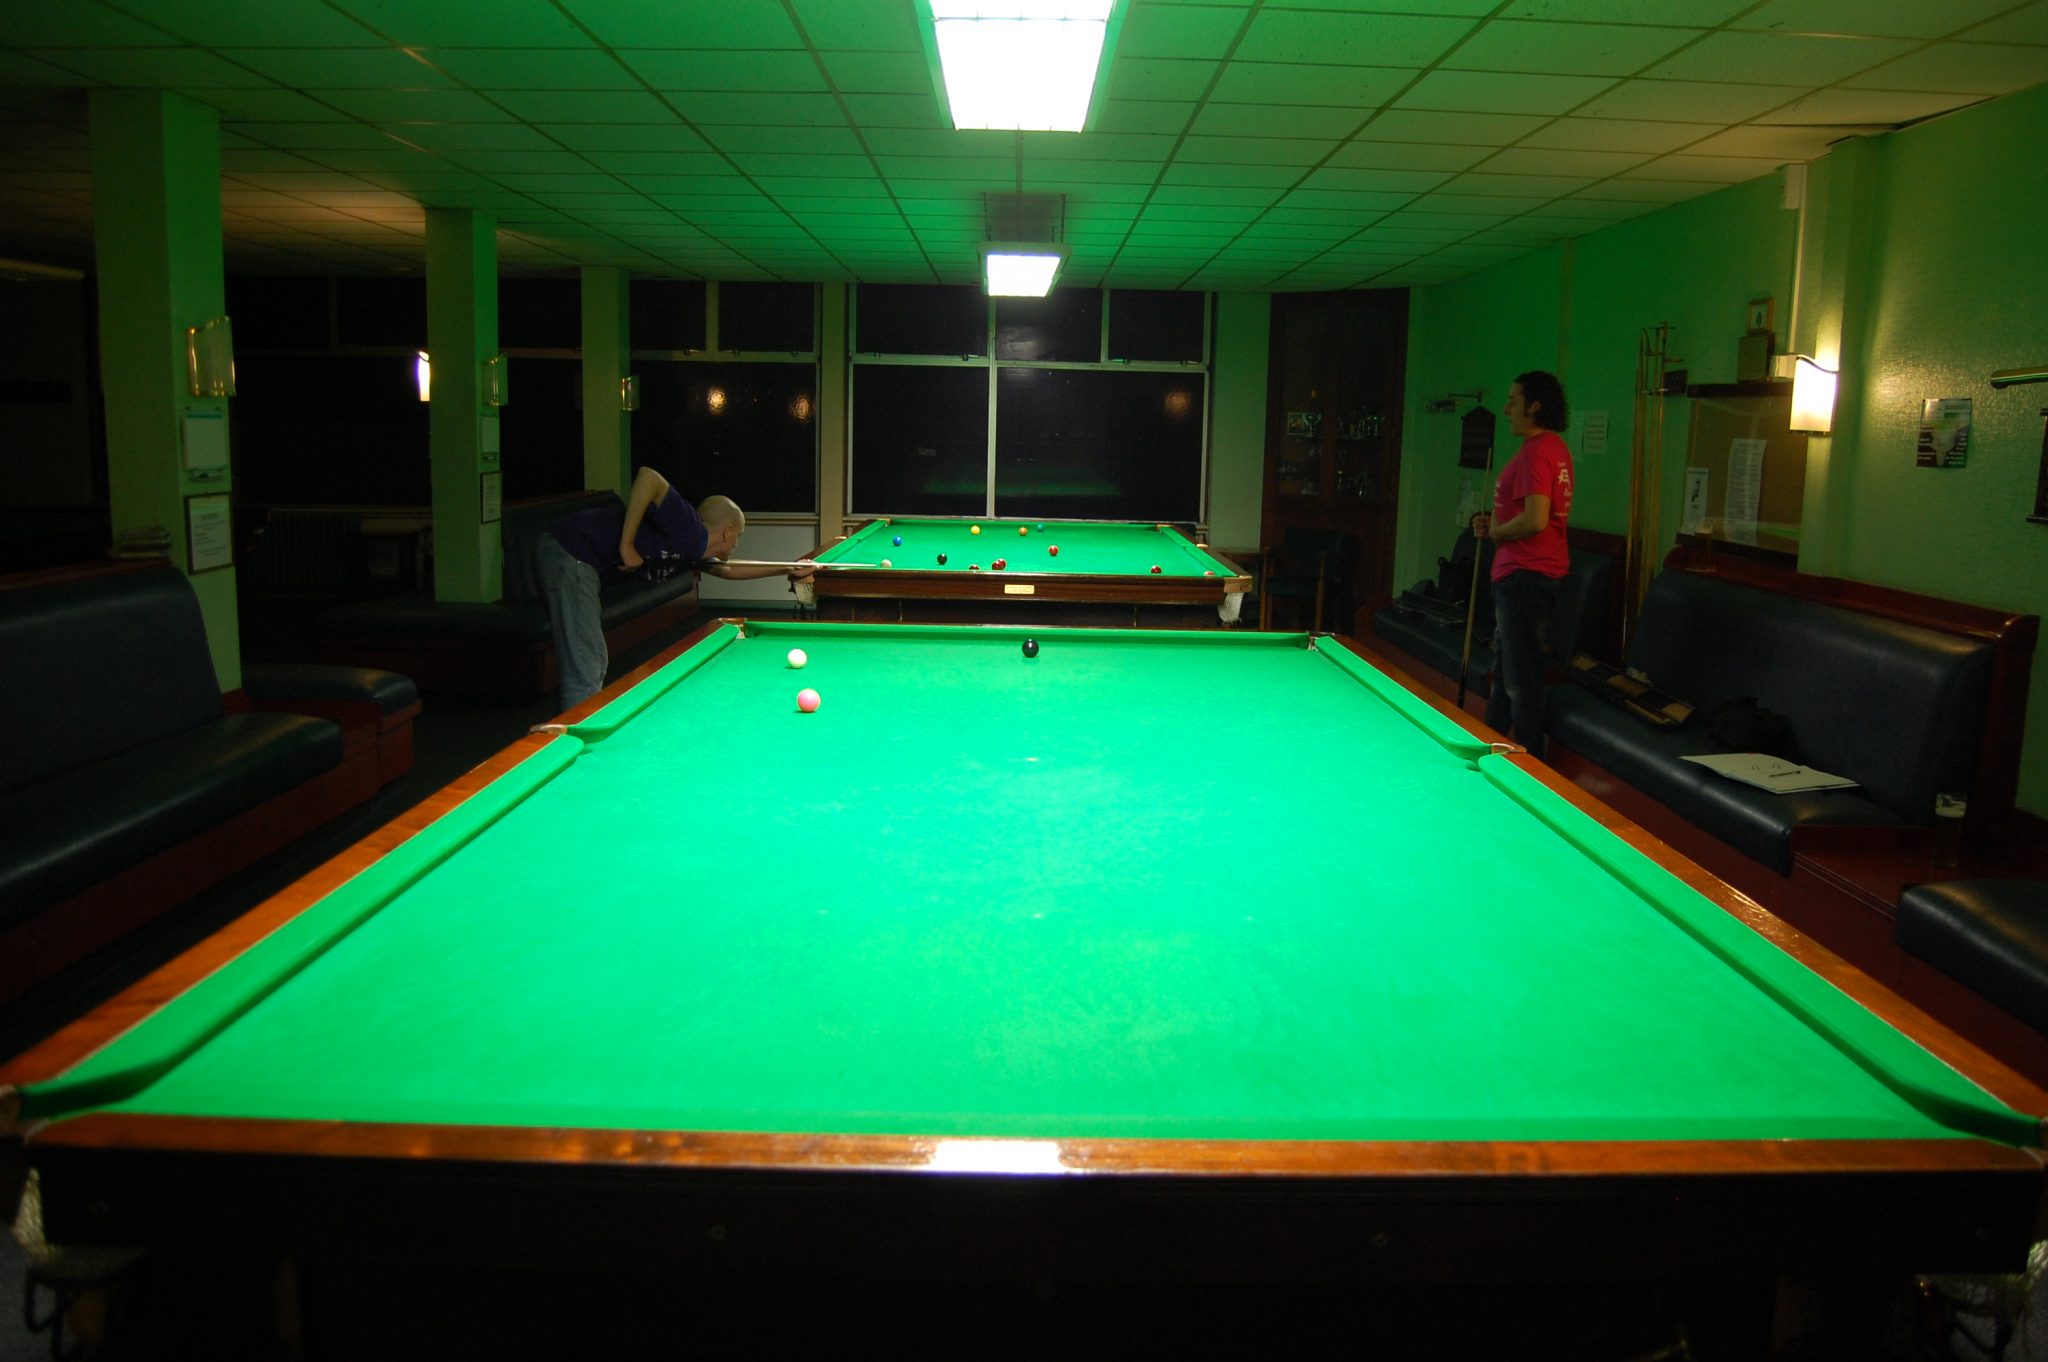 Jon wins his third frame in a row at Plessey Club